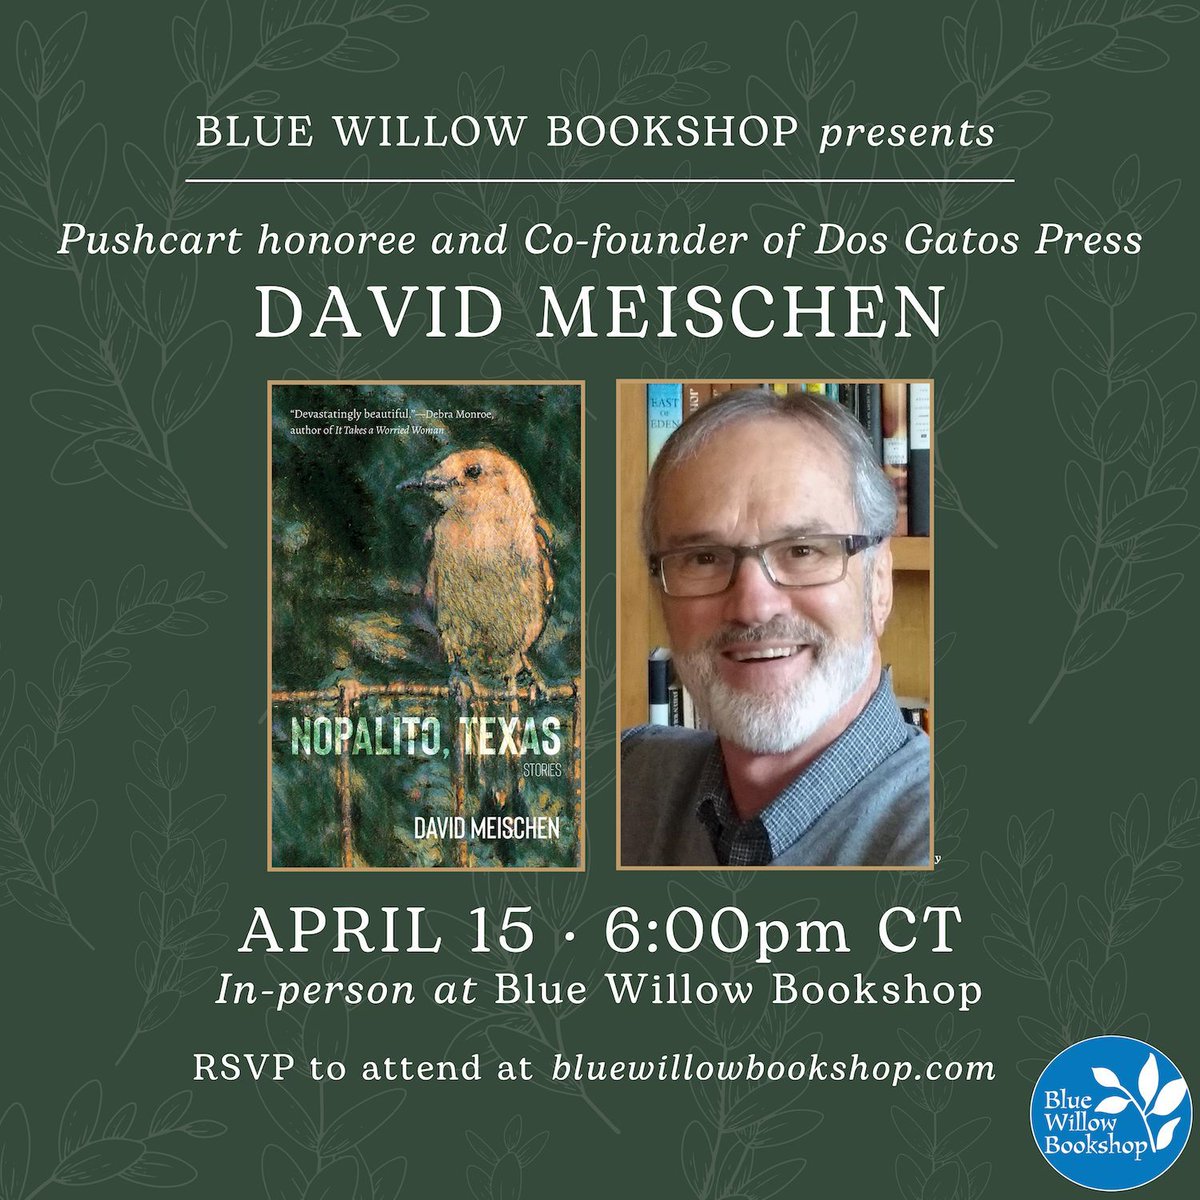 Next Monday, join us in the bookshop for an event with Pushcart honoree and award-winning author David Meischen, celebrating his debut story collection, NOPALITO, TEXAS. ⭐️

You can reserve your book and RSVP here: bluewillowbookshop.com/event/meischen… @meischen1948 @UNMPress